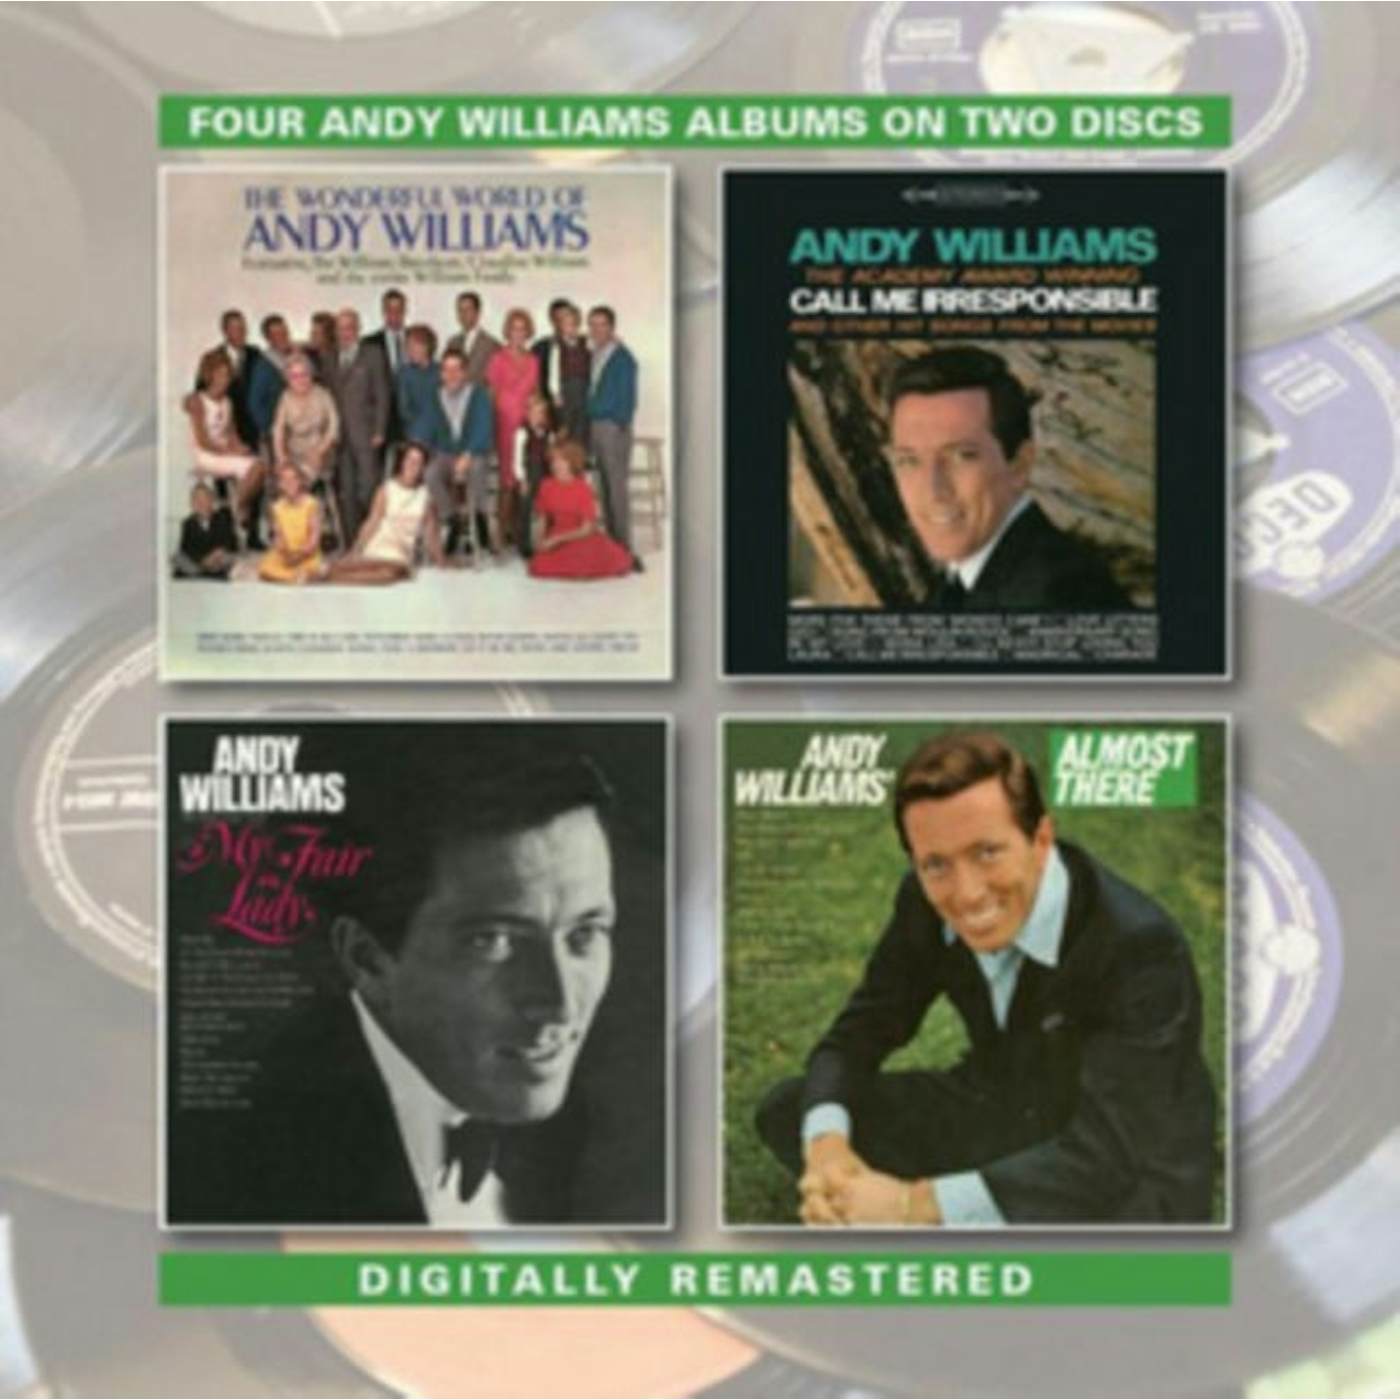 Andy Williams CD - The Wonderful World Of Andy Williams / 'Call Me Irresponsible'